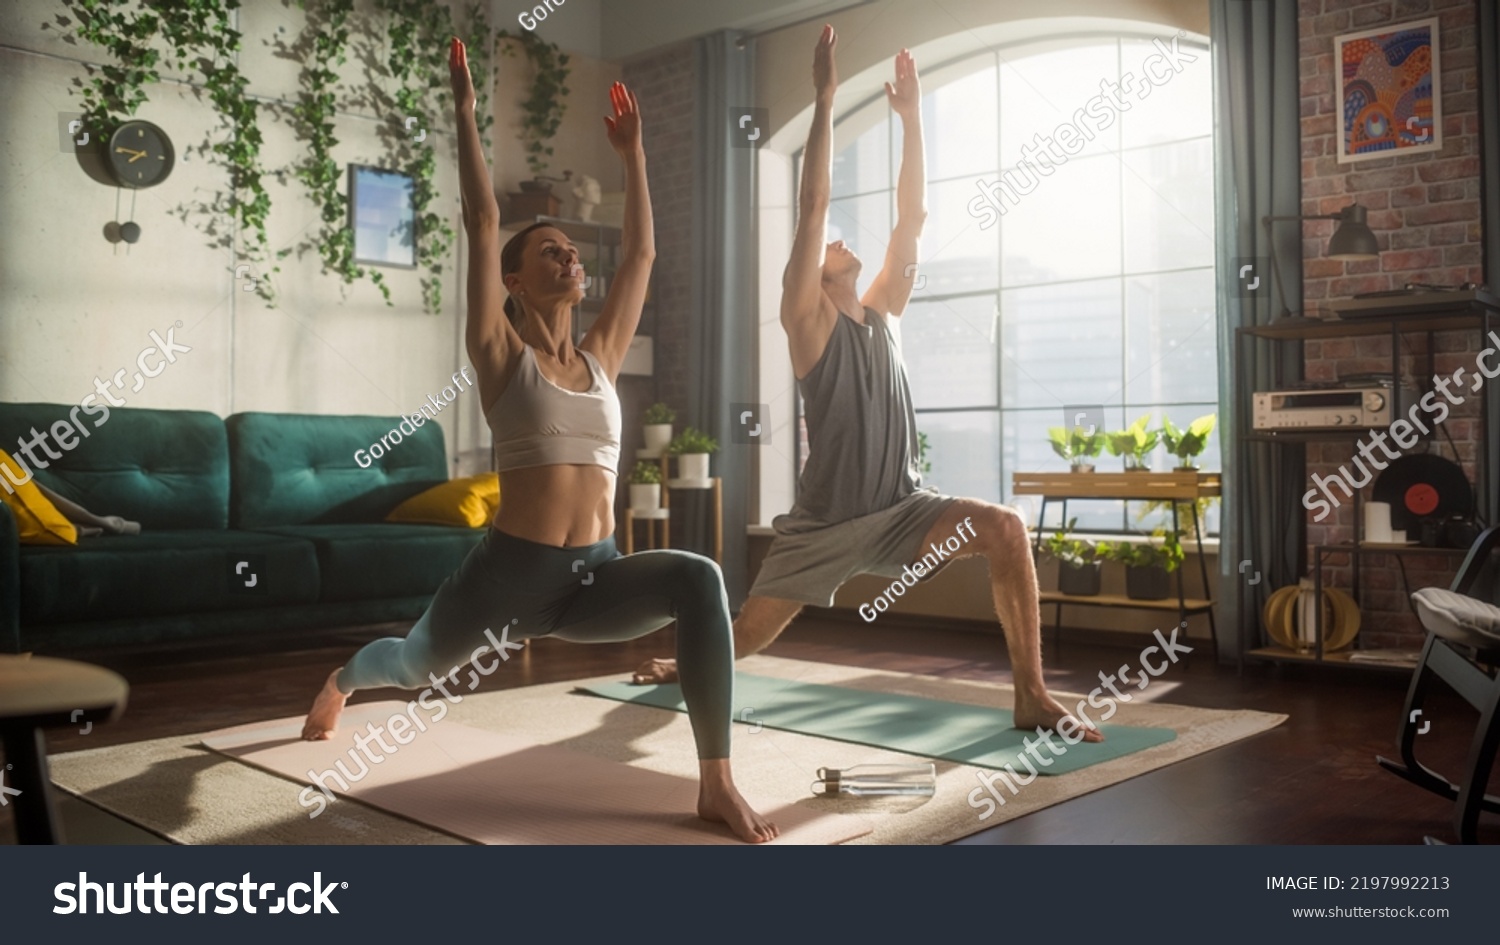 Athletic Young Couple Exercising Together, Stretching and Doing Yoga in the Morning in Bright Sunny Room at Home. Beautiful Man and Woman in Sports Clothes Practising Different Asana Poses on the Mat. #2197992213